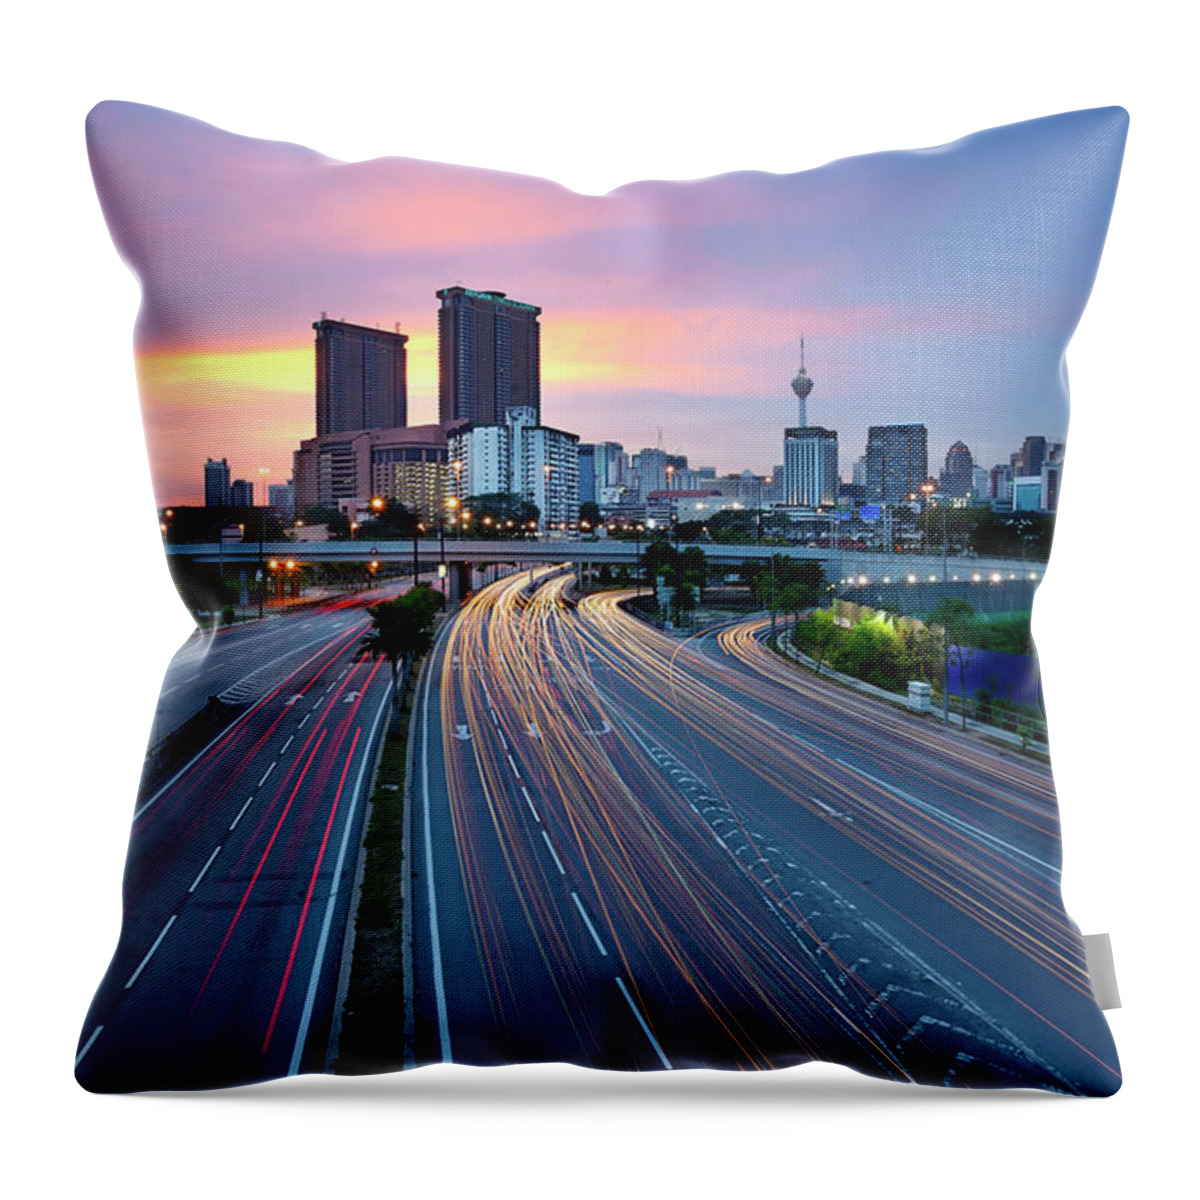 Built Structure Throw Pillow featuring the photograph Kuala Lumpur City At Sunset With Light by Tuah Roslan